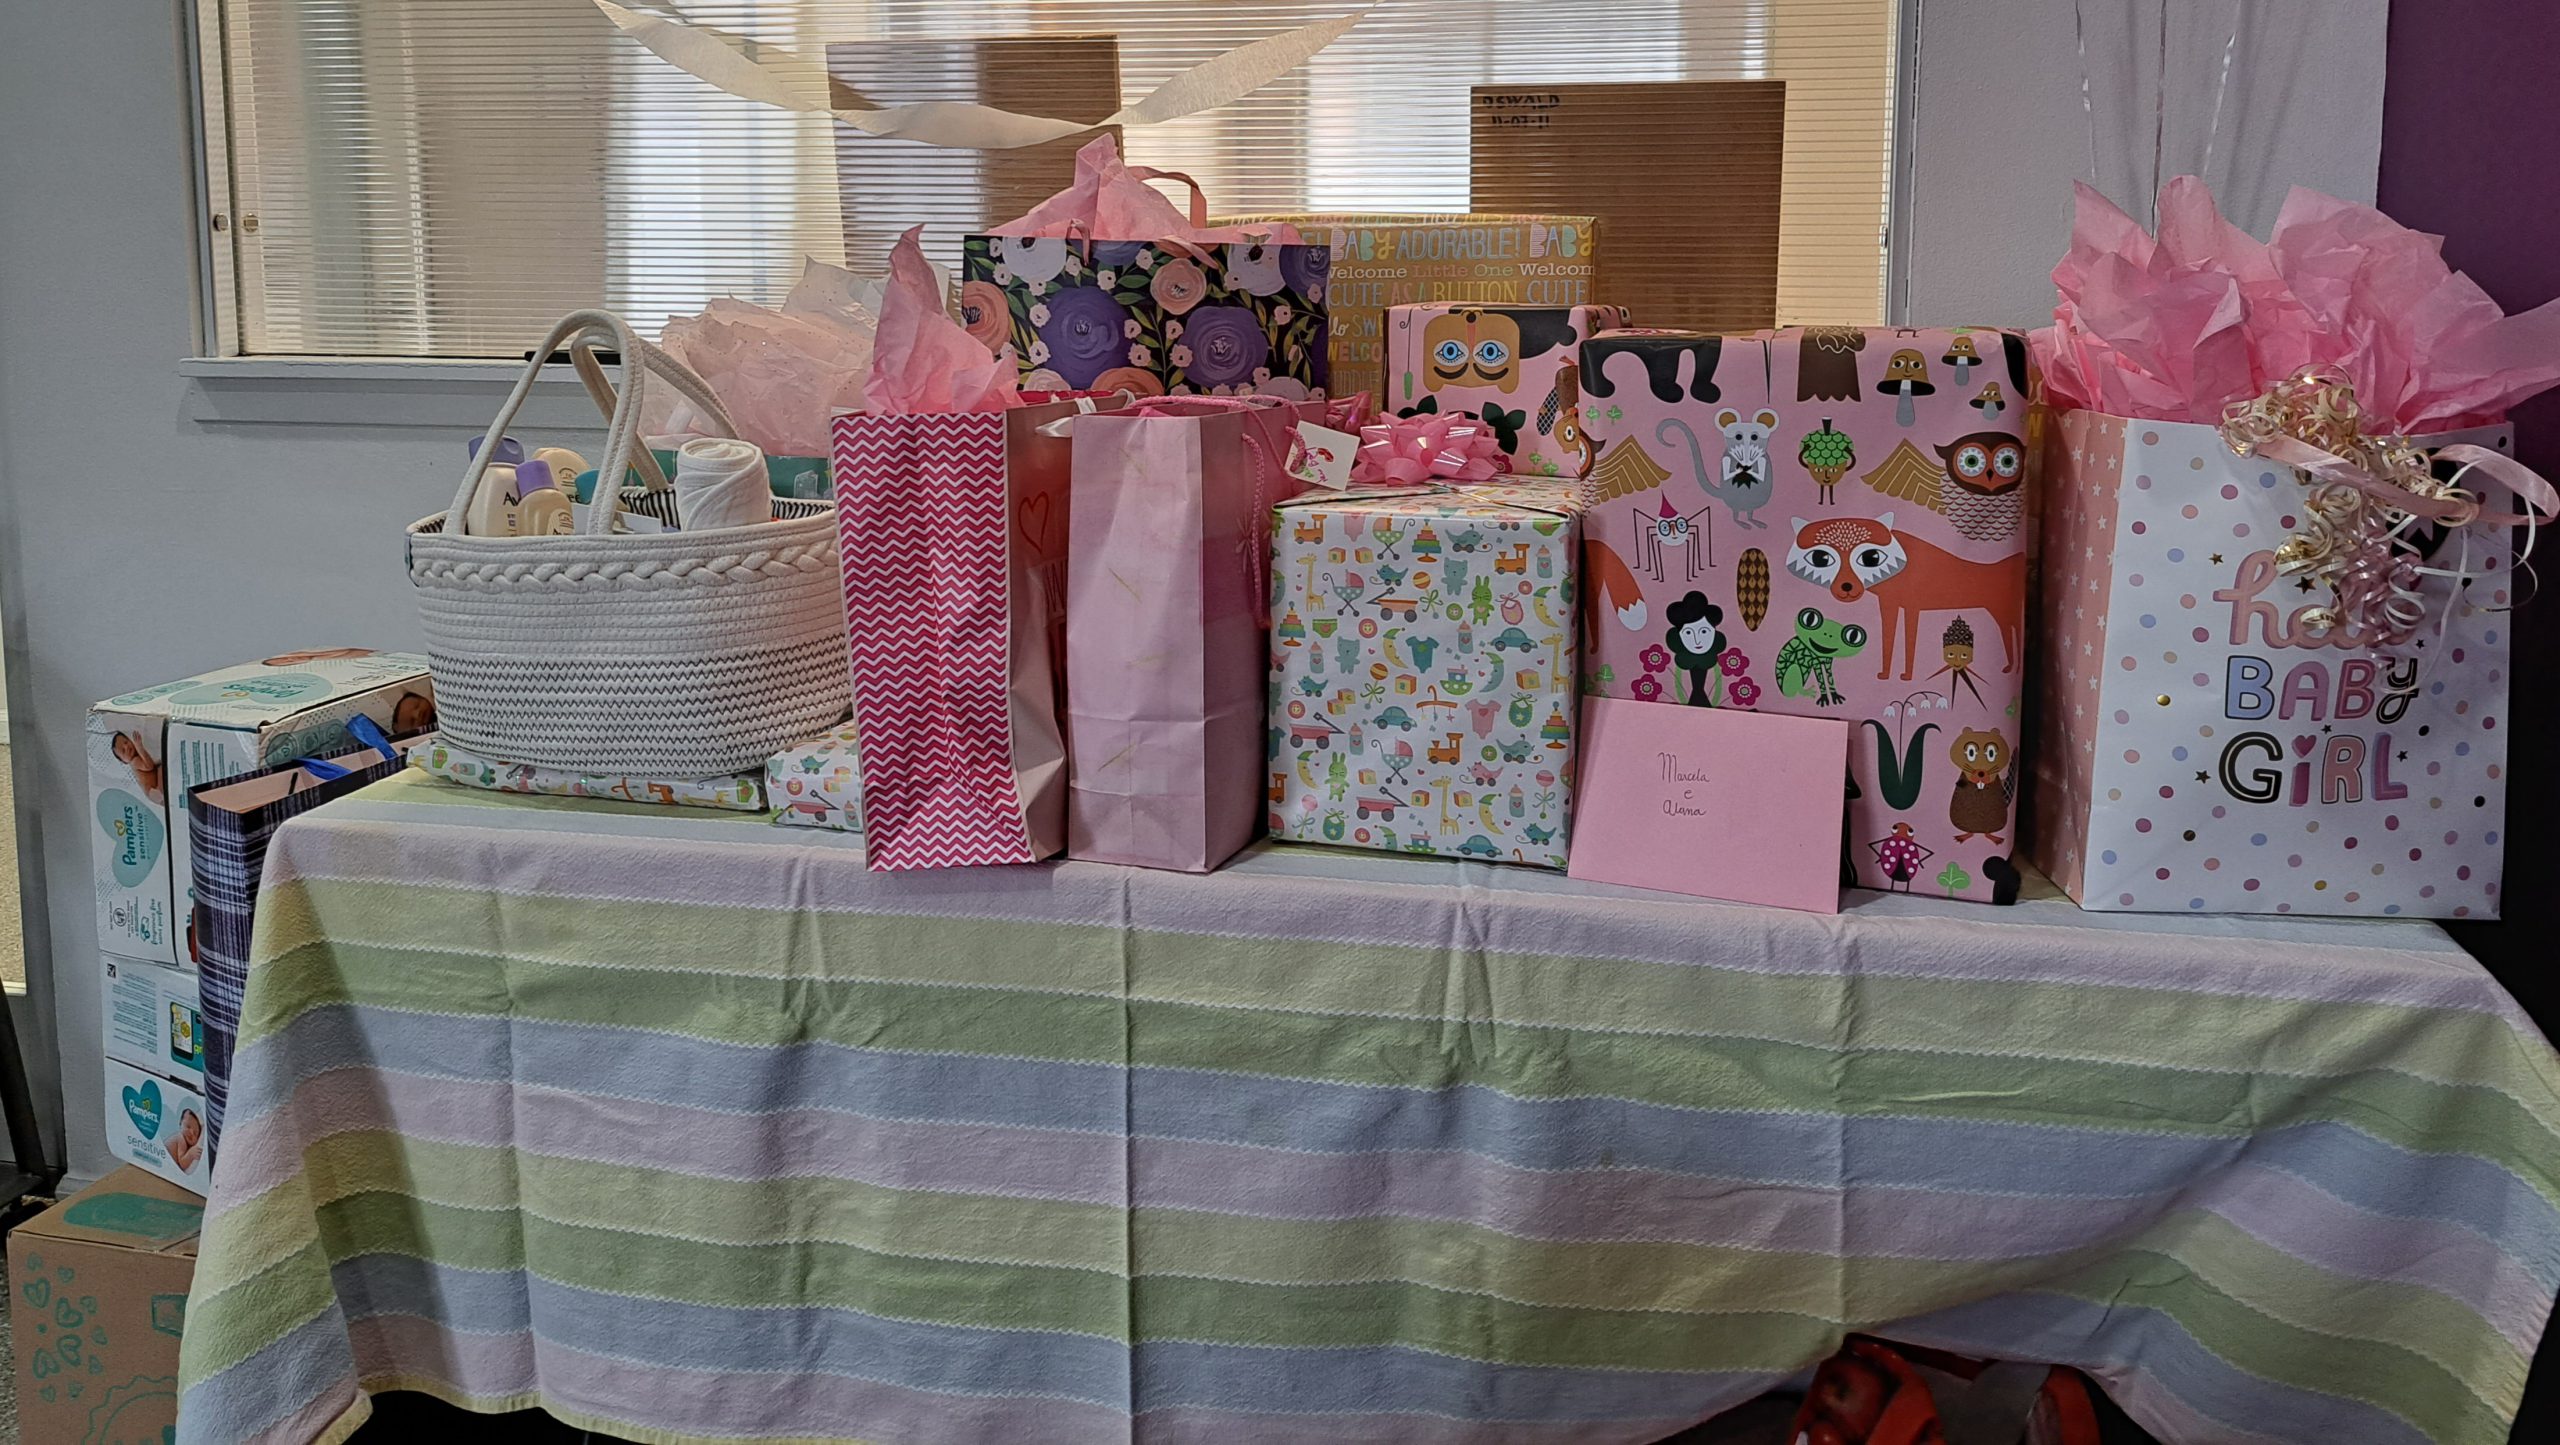 Baby Shower gifts collected for refugee mother at Freedom House